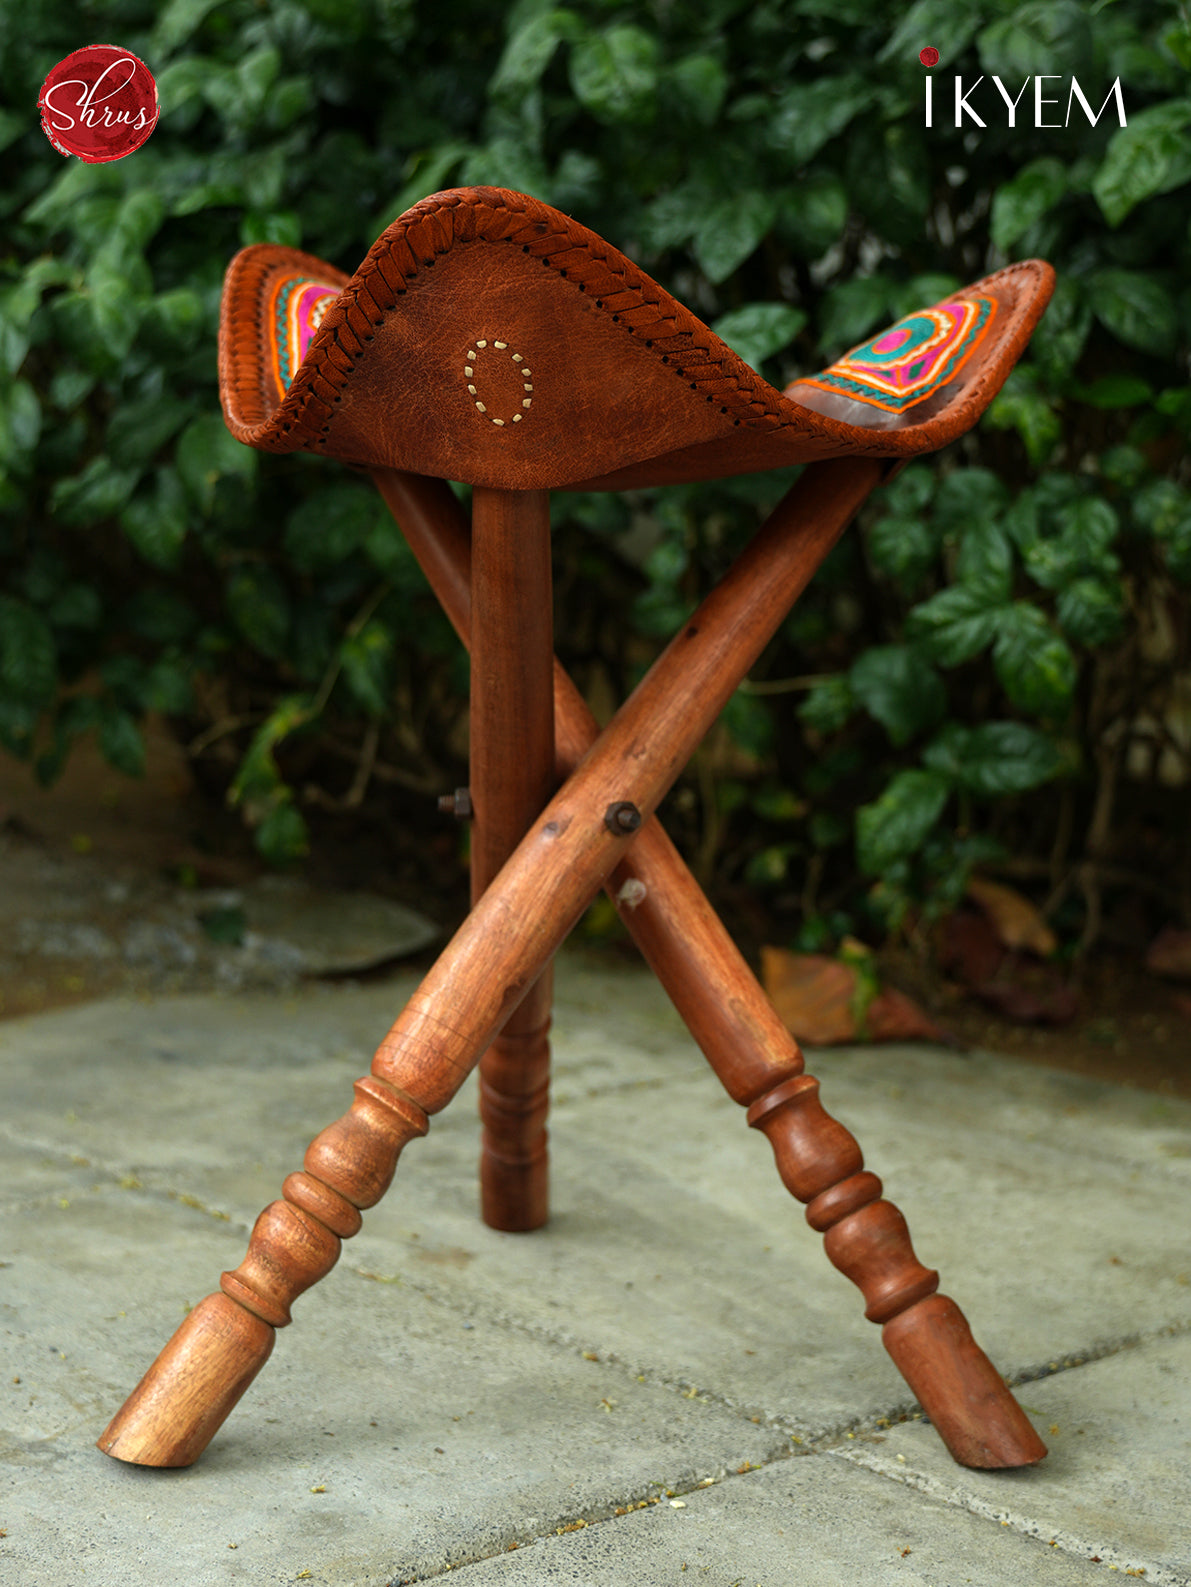 Leather Wooden Stool